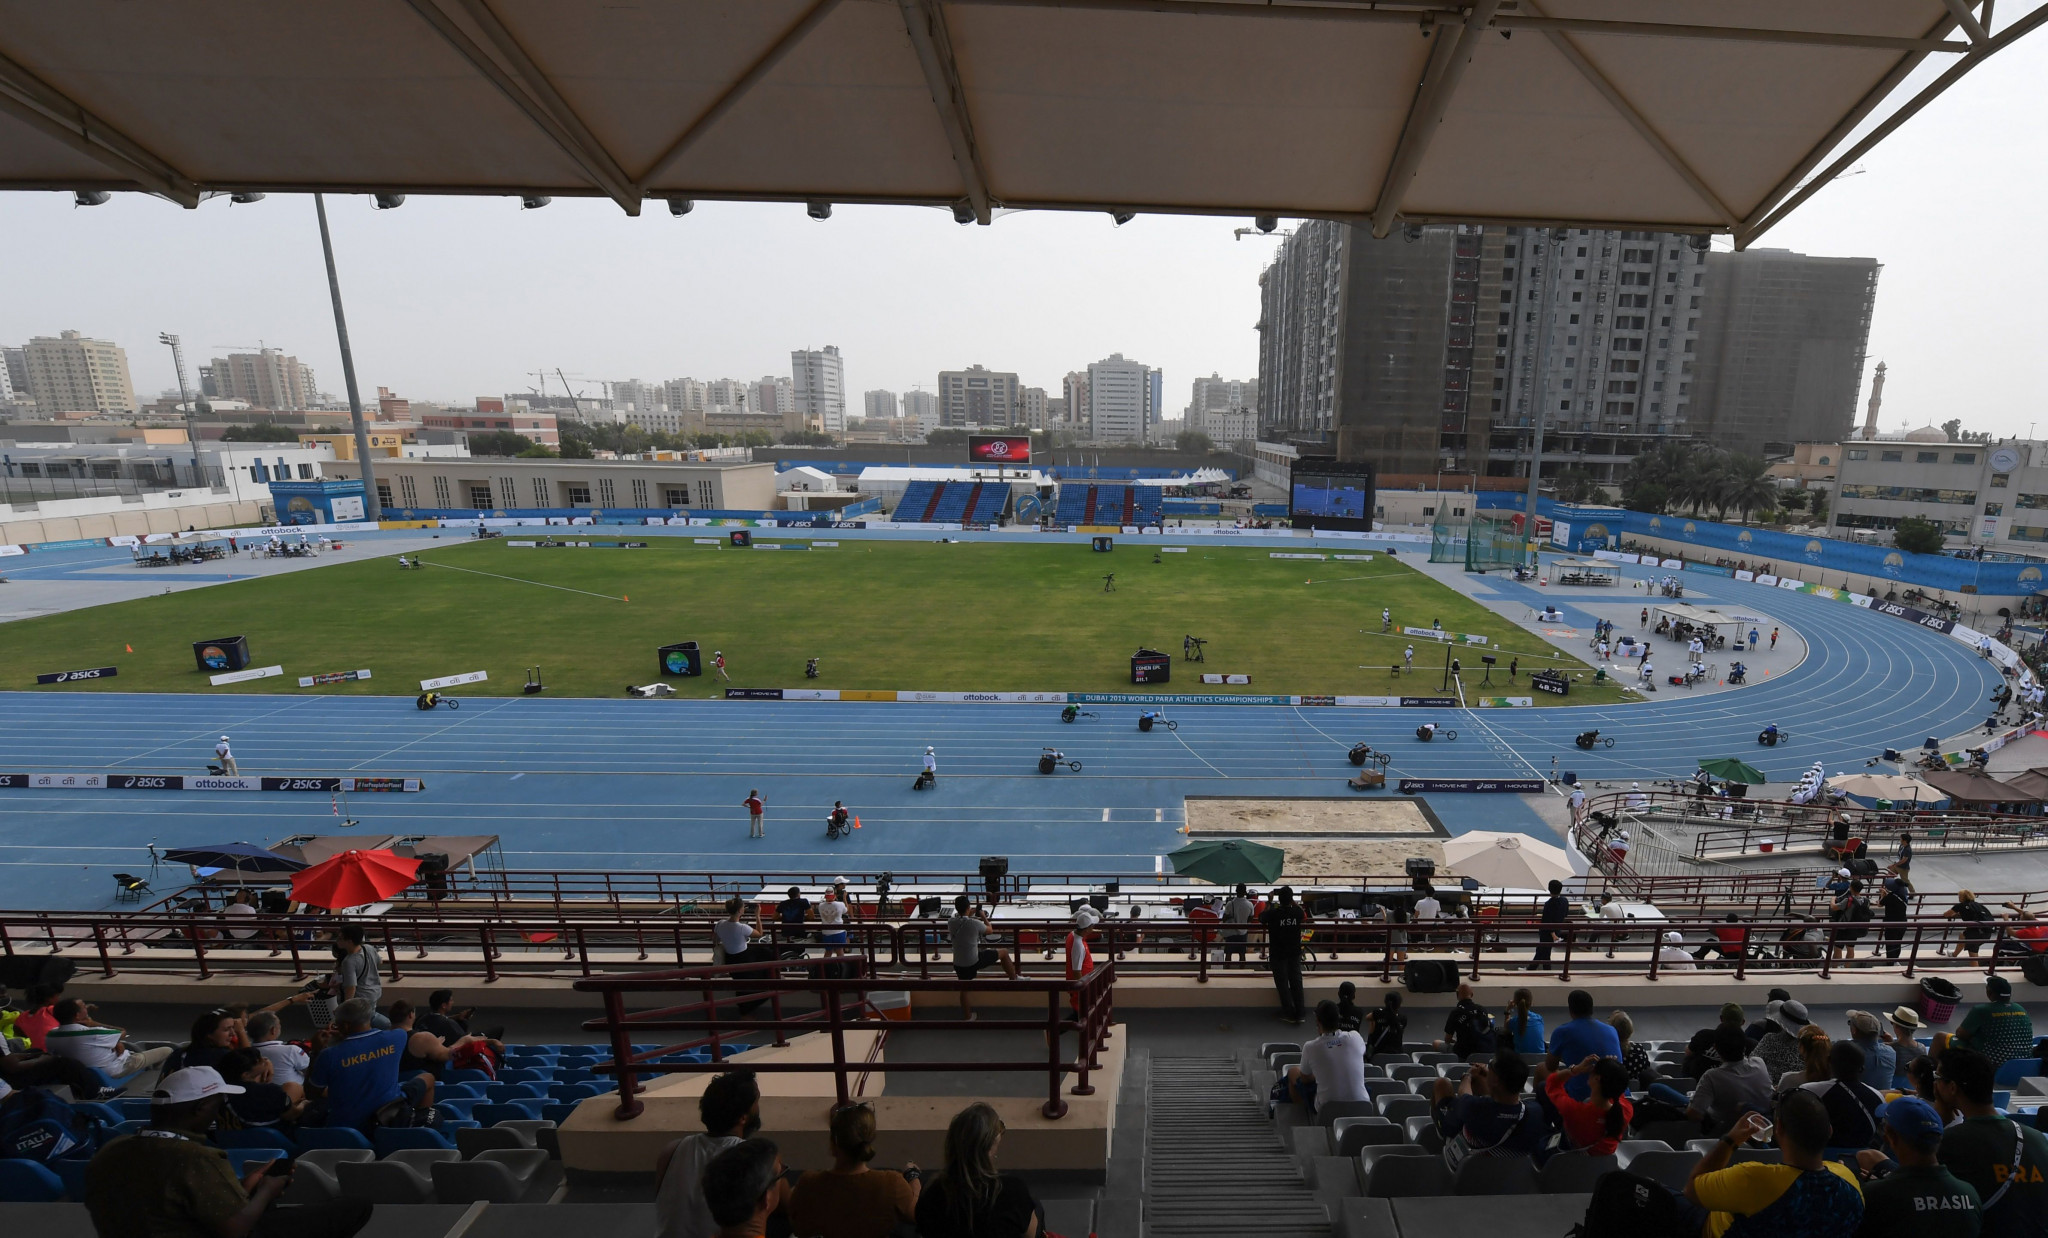 Mehran Nikoeimajd produced the sample prior to the 2019 World Para Athletics Championships held at the Dubai Club for People with Determination ©Getty Images